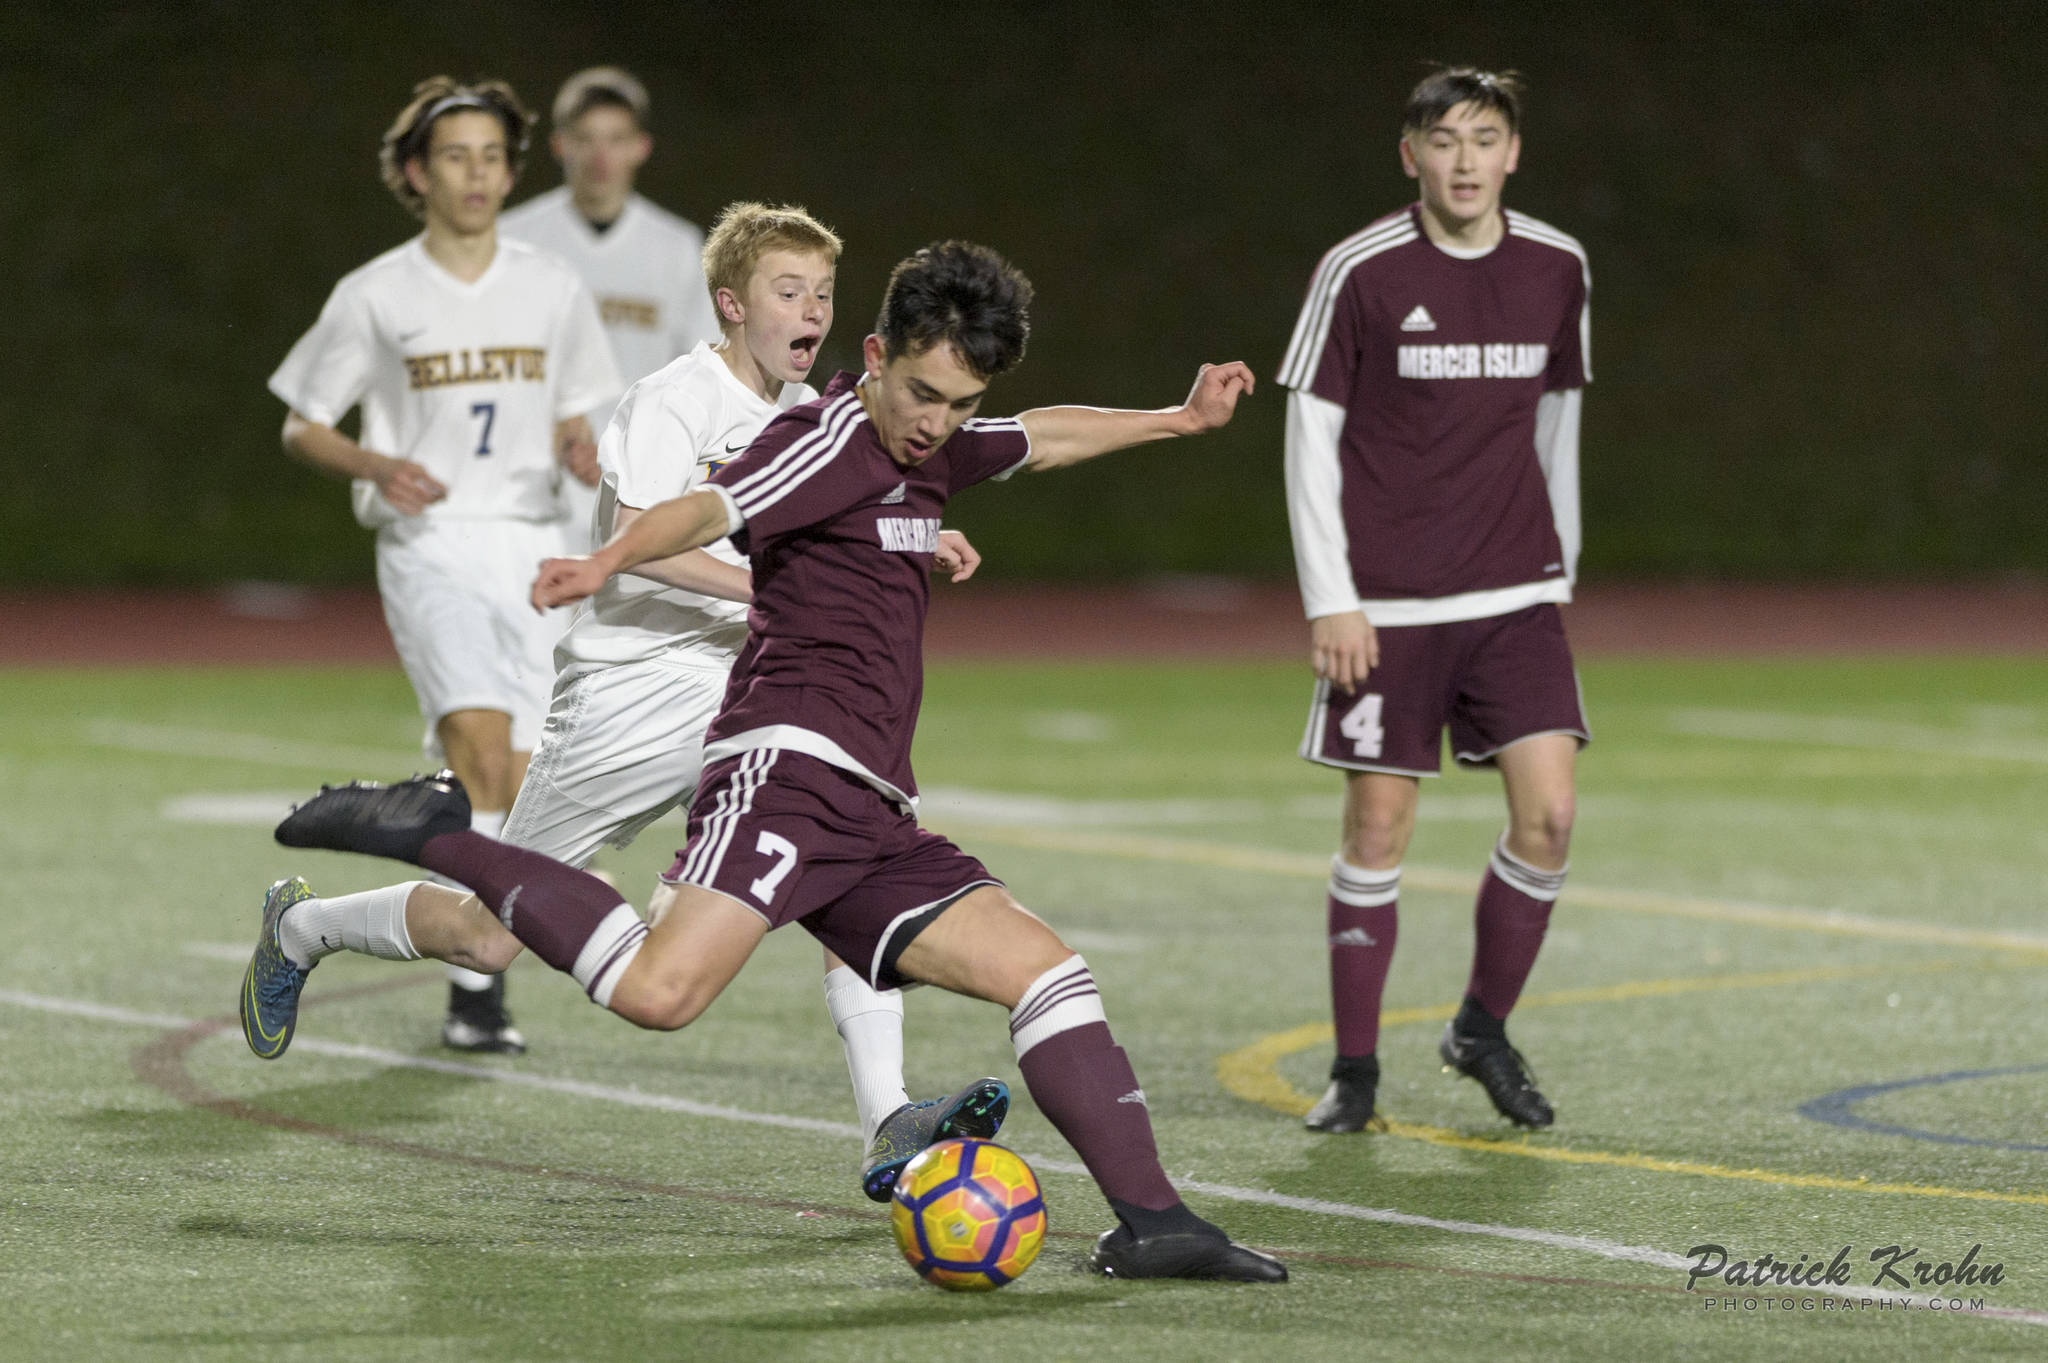 Photo courtesy of Patrick Krohn/Patrick Krohn Photography                                Mercer Island junior midfielder Dakota Promet takes a shot on goal against the Bellevue Wolverines in a KingCo 3A/2A contest on March 23 at Bellevue High School. The Islanders and Wolverines battled to a 0-0 draw.